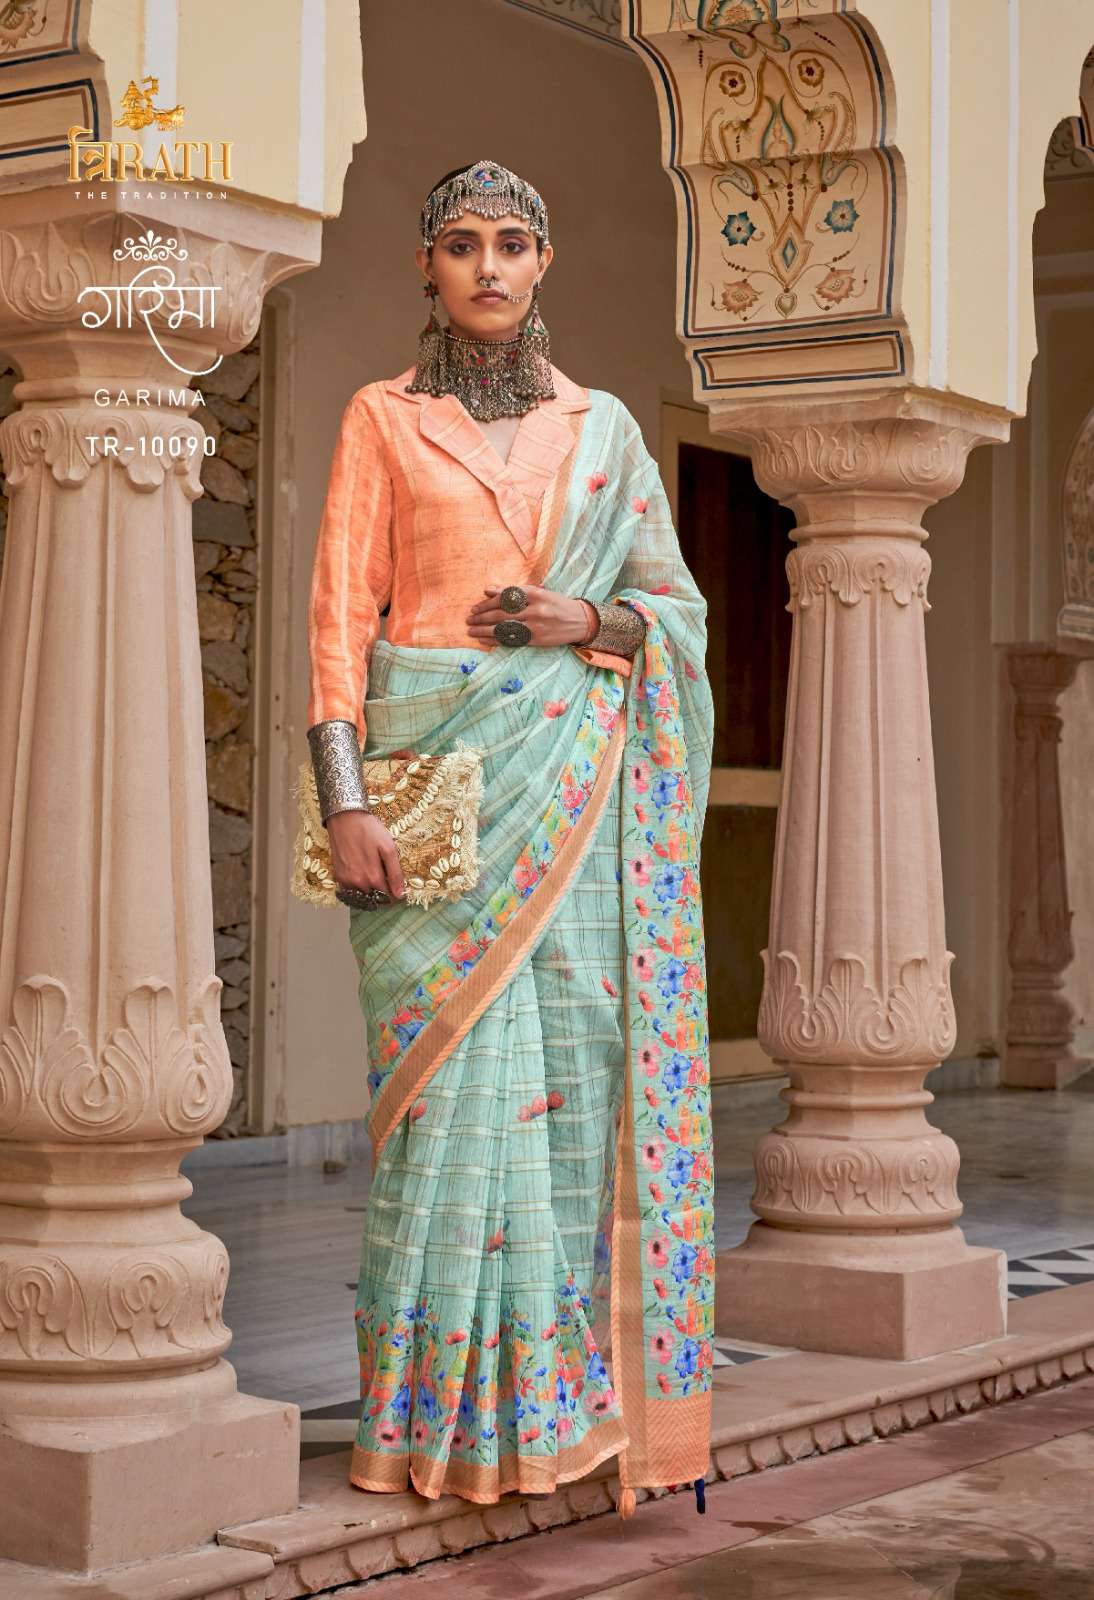 TRI-RATH GARIMA LINEN WITH CHECKS WITH EXCLUSIVE FLOWER PRIN...